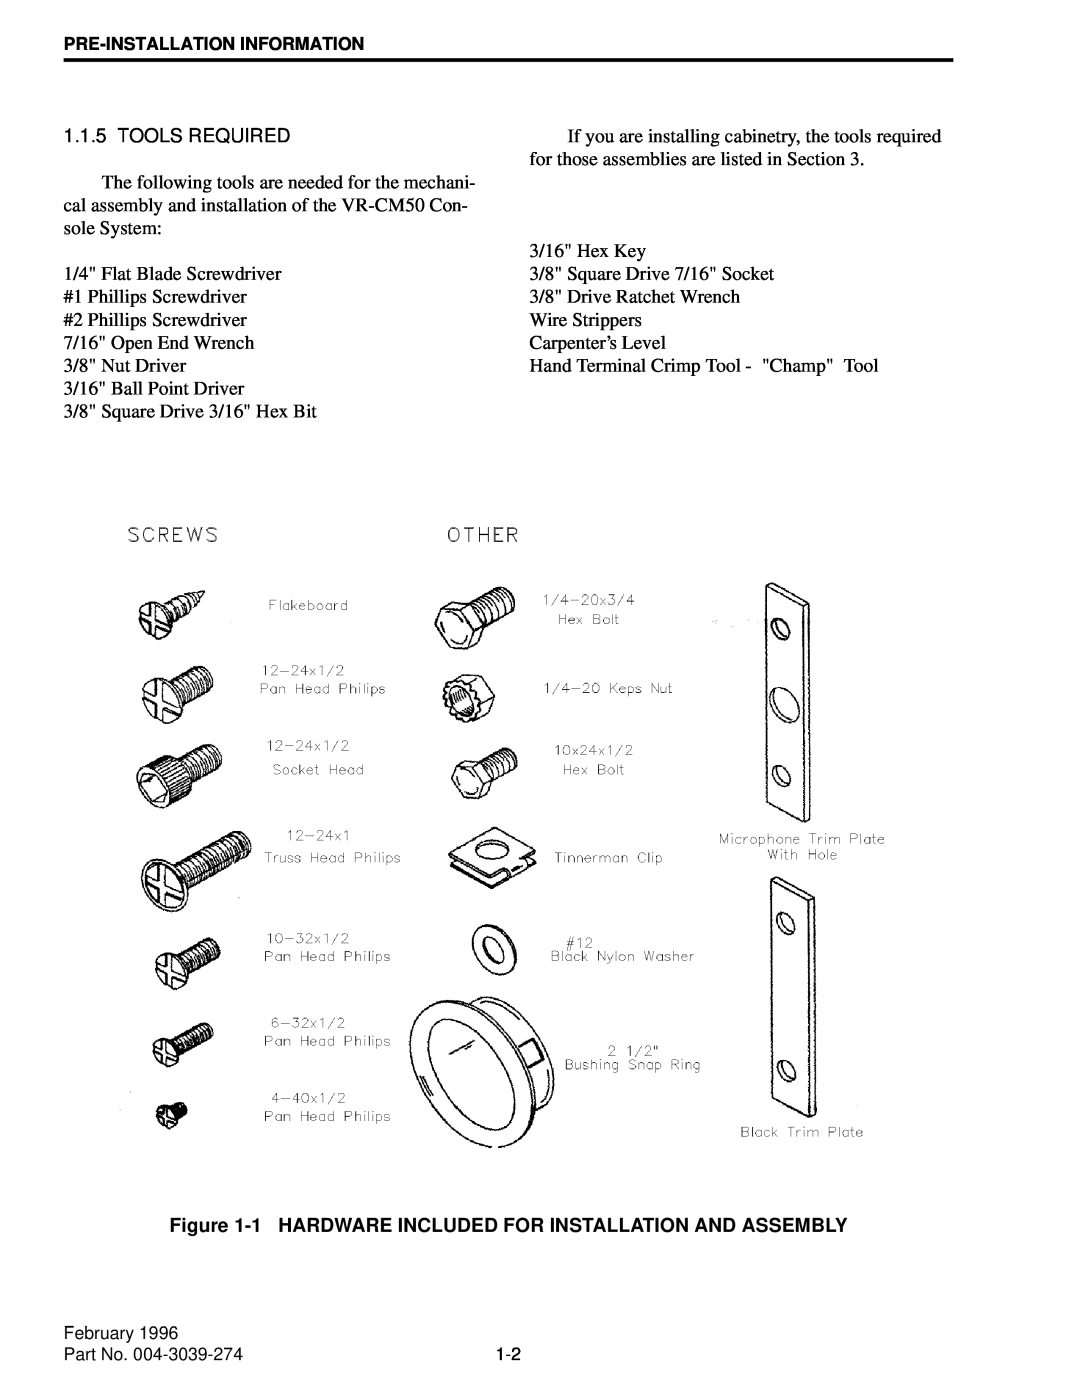 EFJohnson VR-CM50 manual for those assemblies are listed in Section 